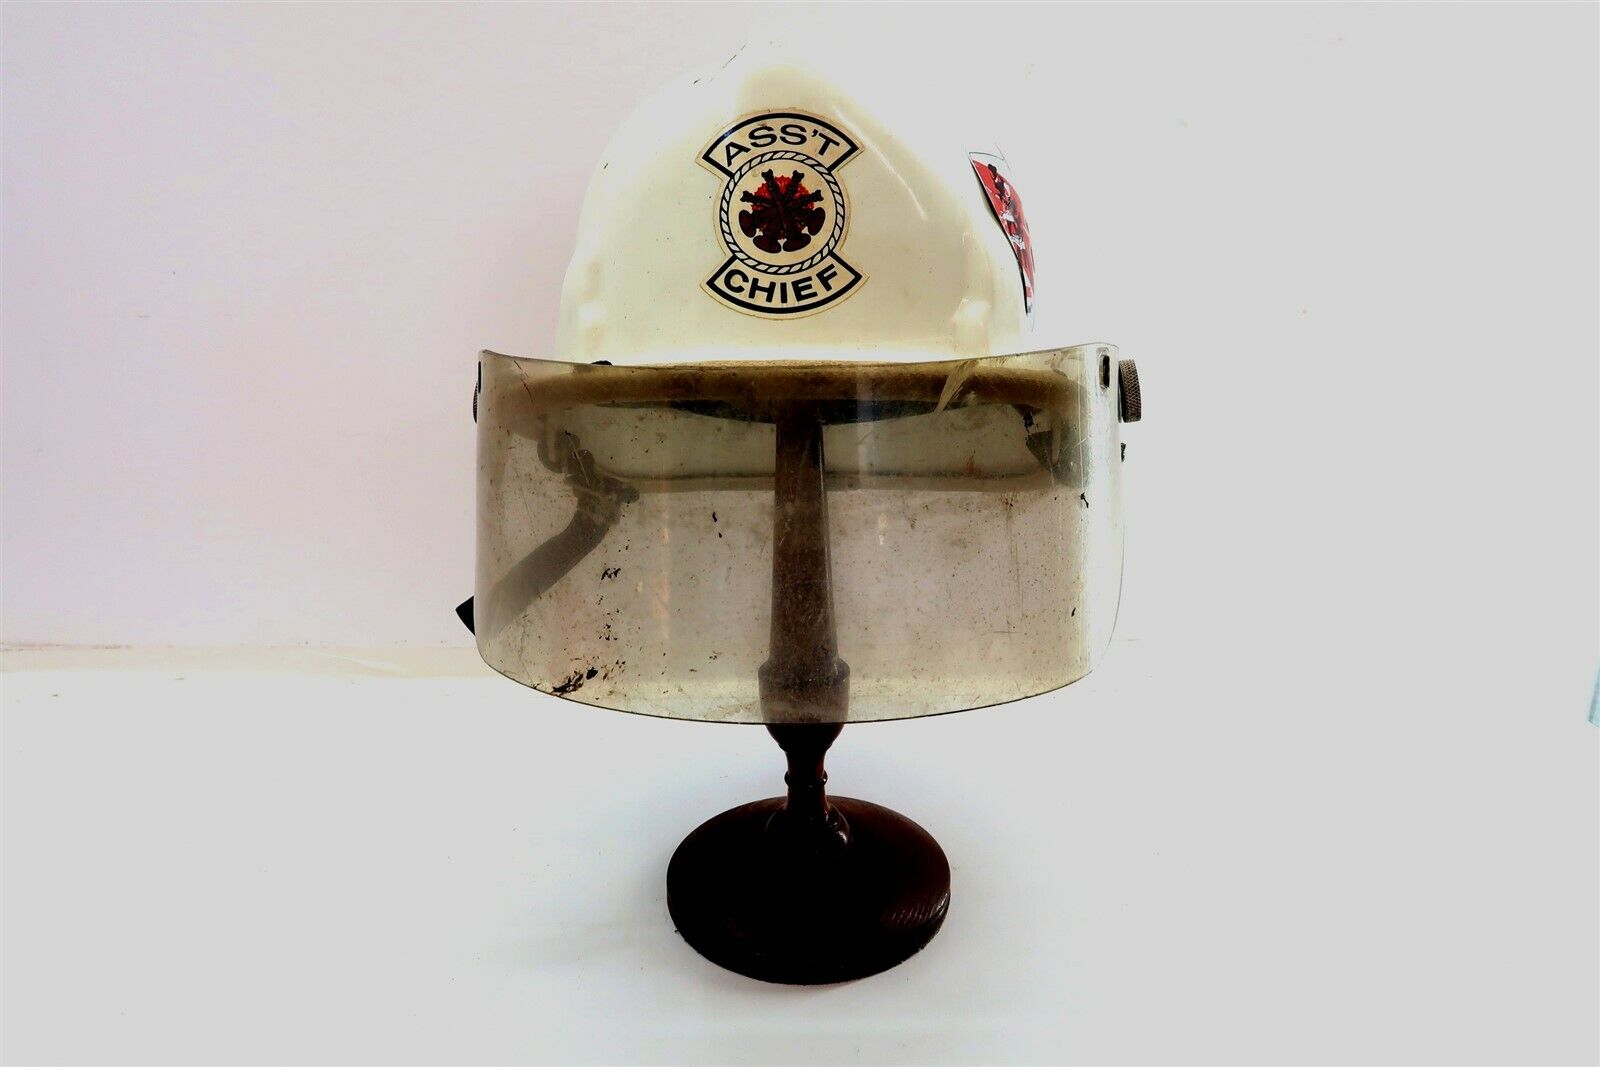 Vintage CAIRNS & BROS White Fire Helmet ASS'T CHIEF with Visor 